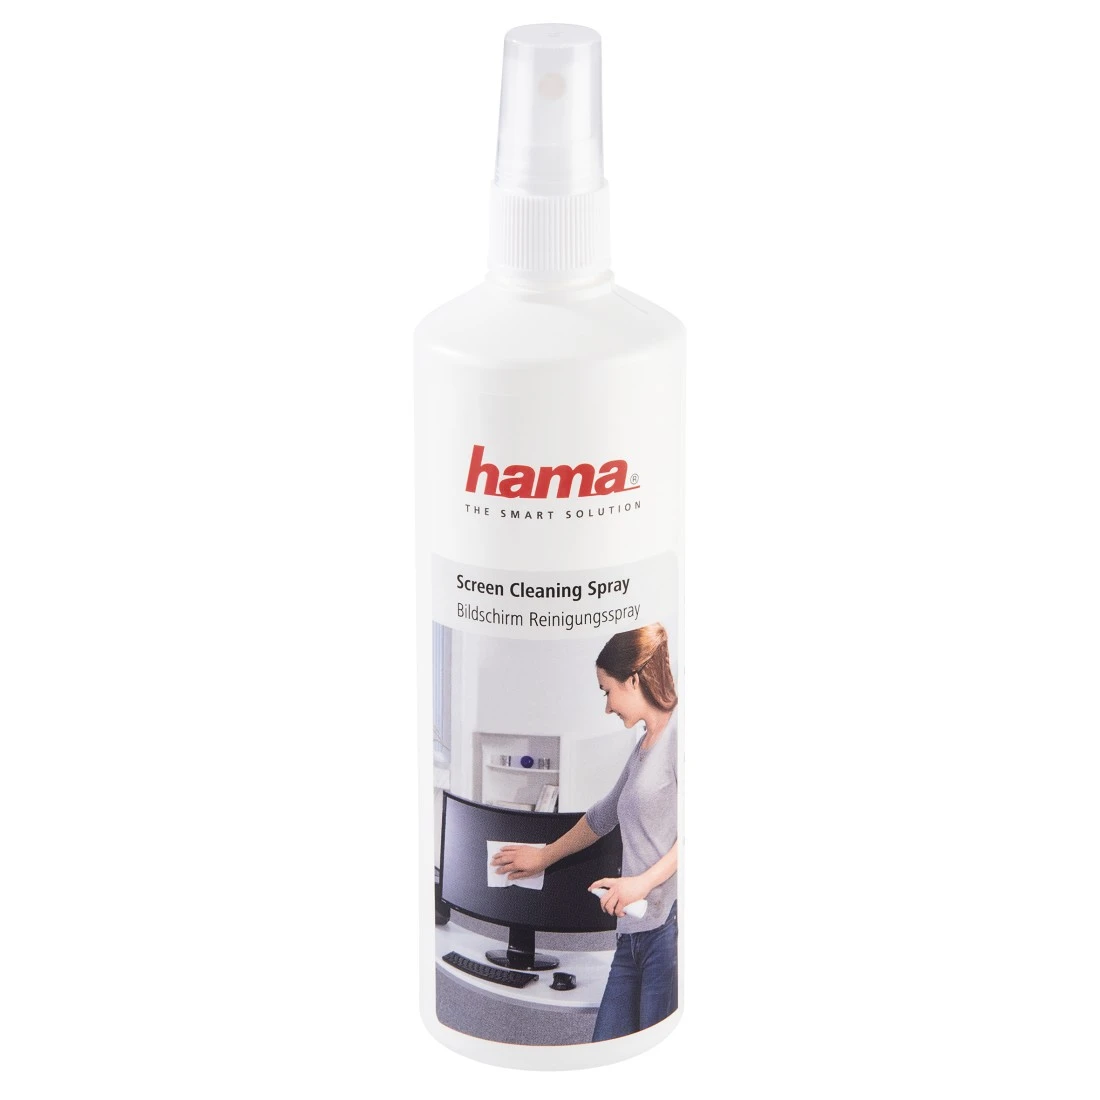 You Recently Viewed Hama 00113807 Screen Cleaning Spray, 250 ml Image